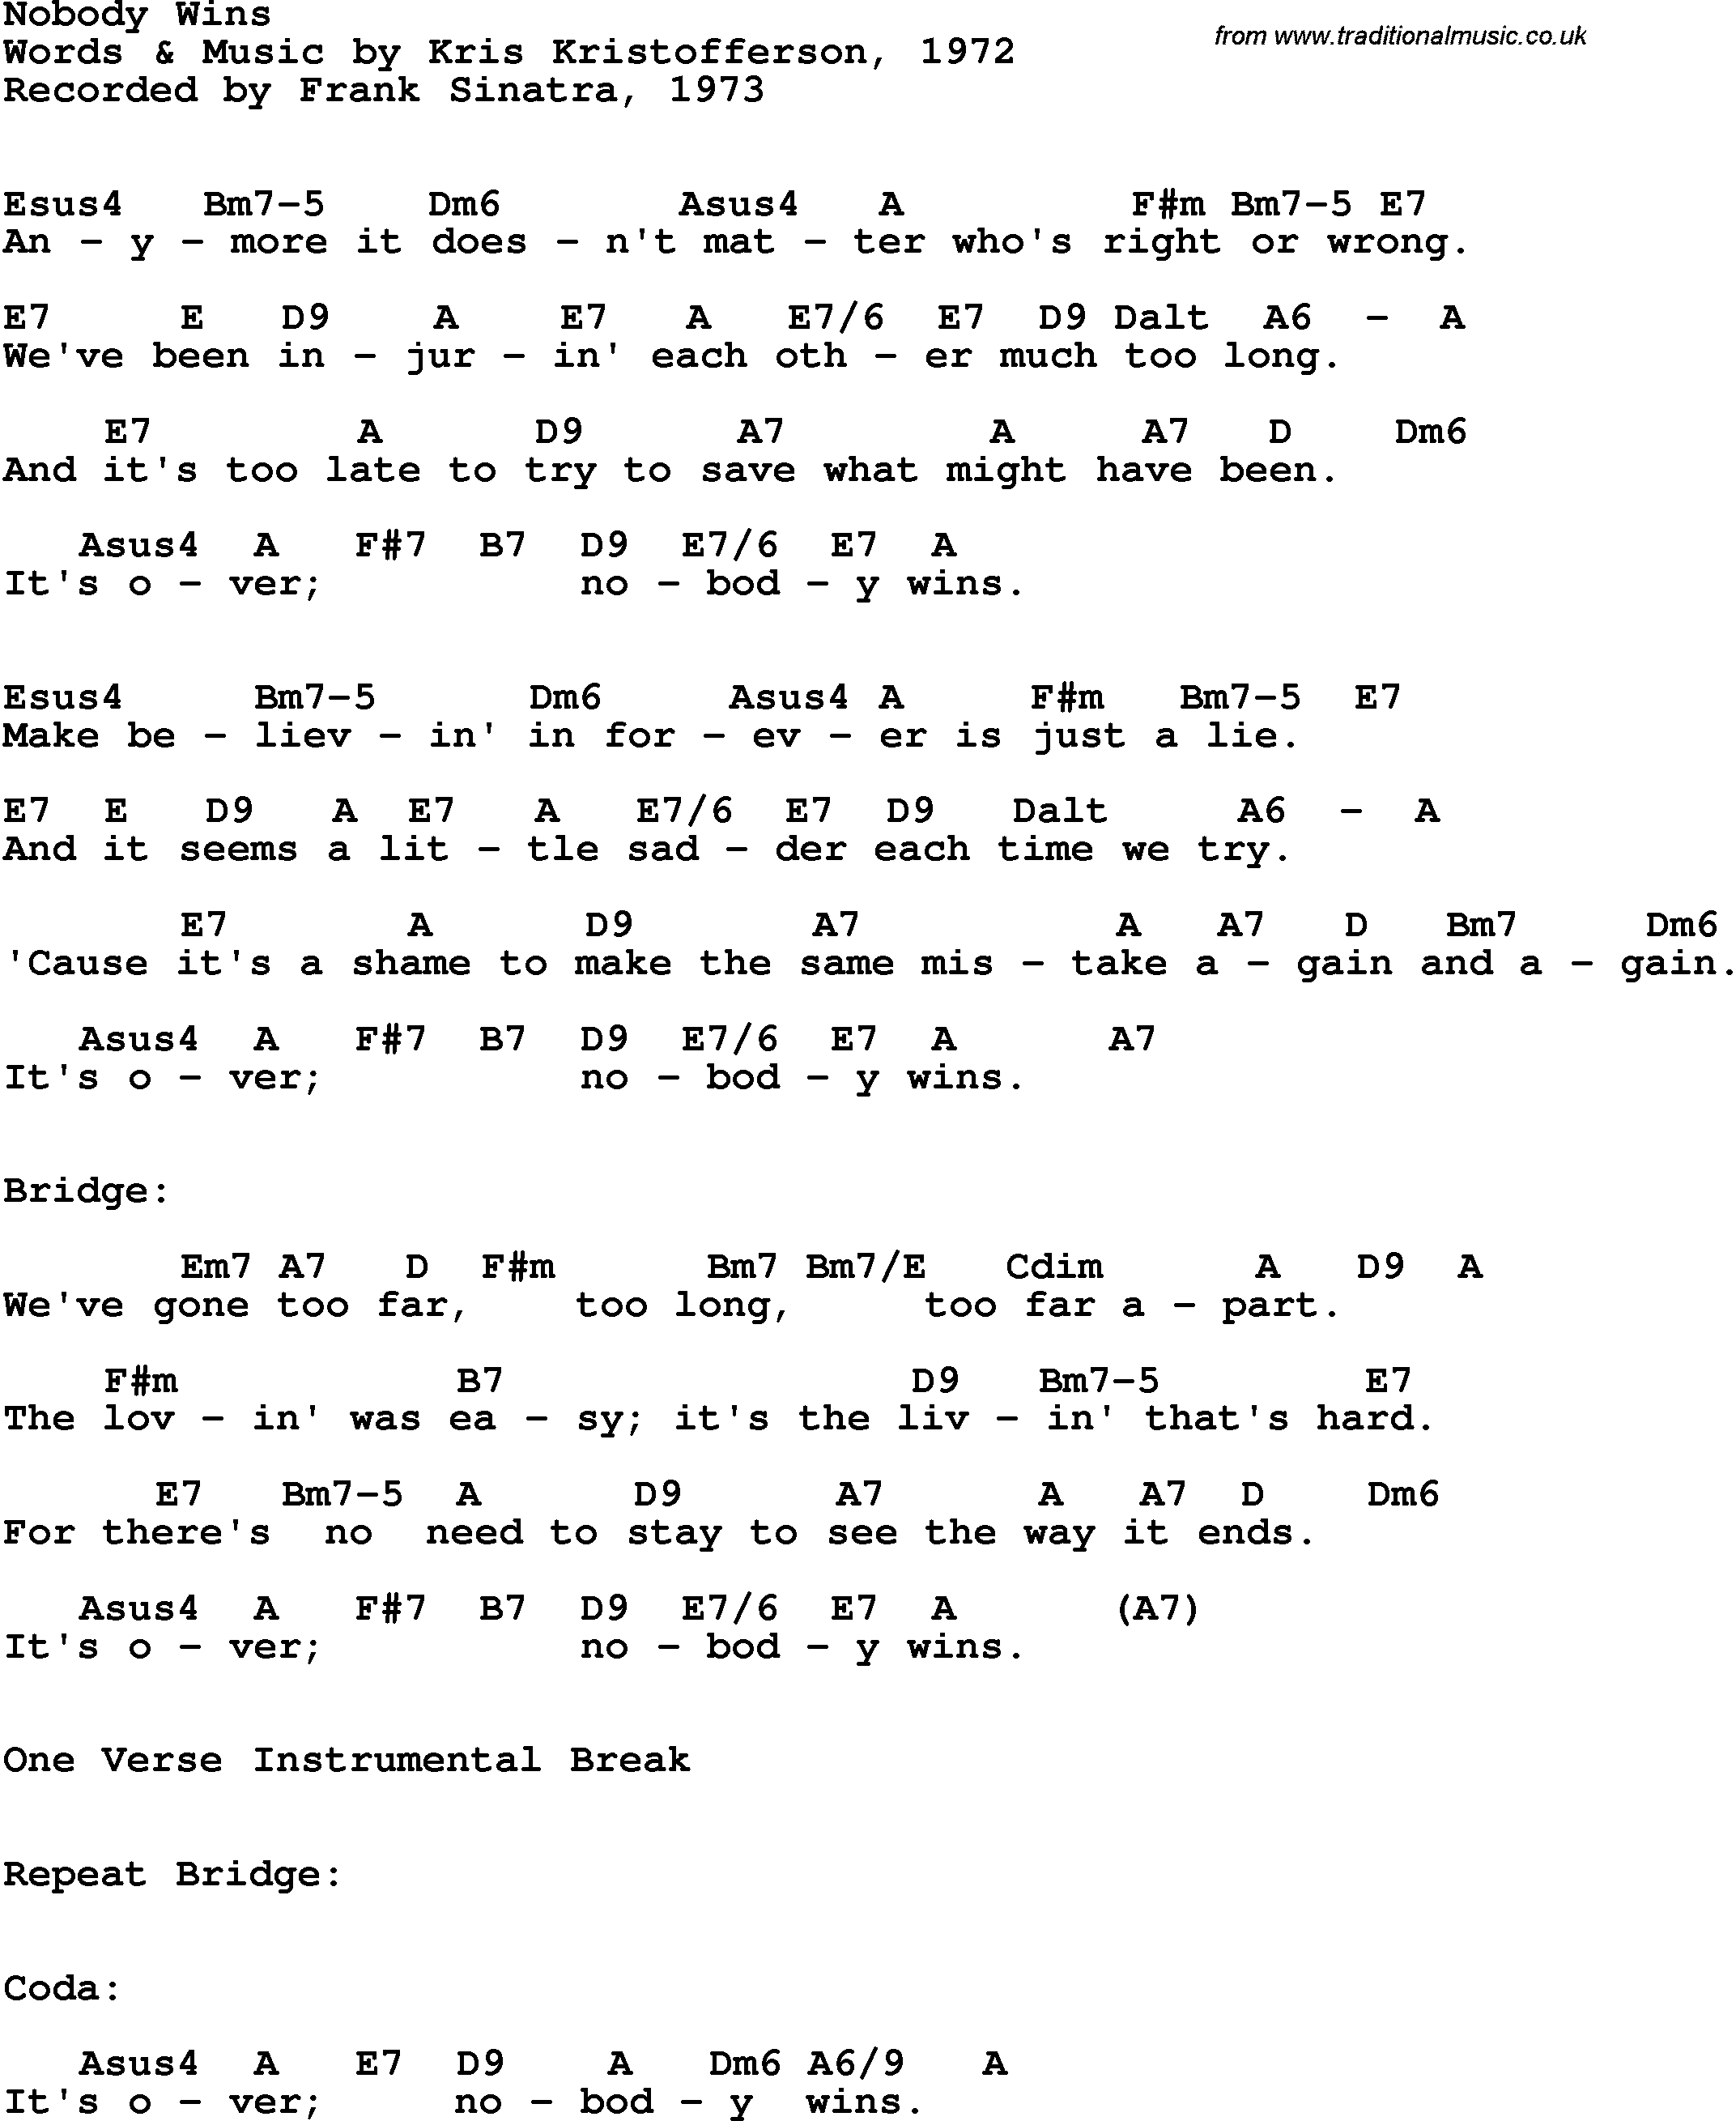 Song Lyrics with guitar chords for Nobody Wins - Frank Sinatra, 1973